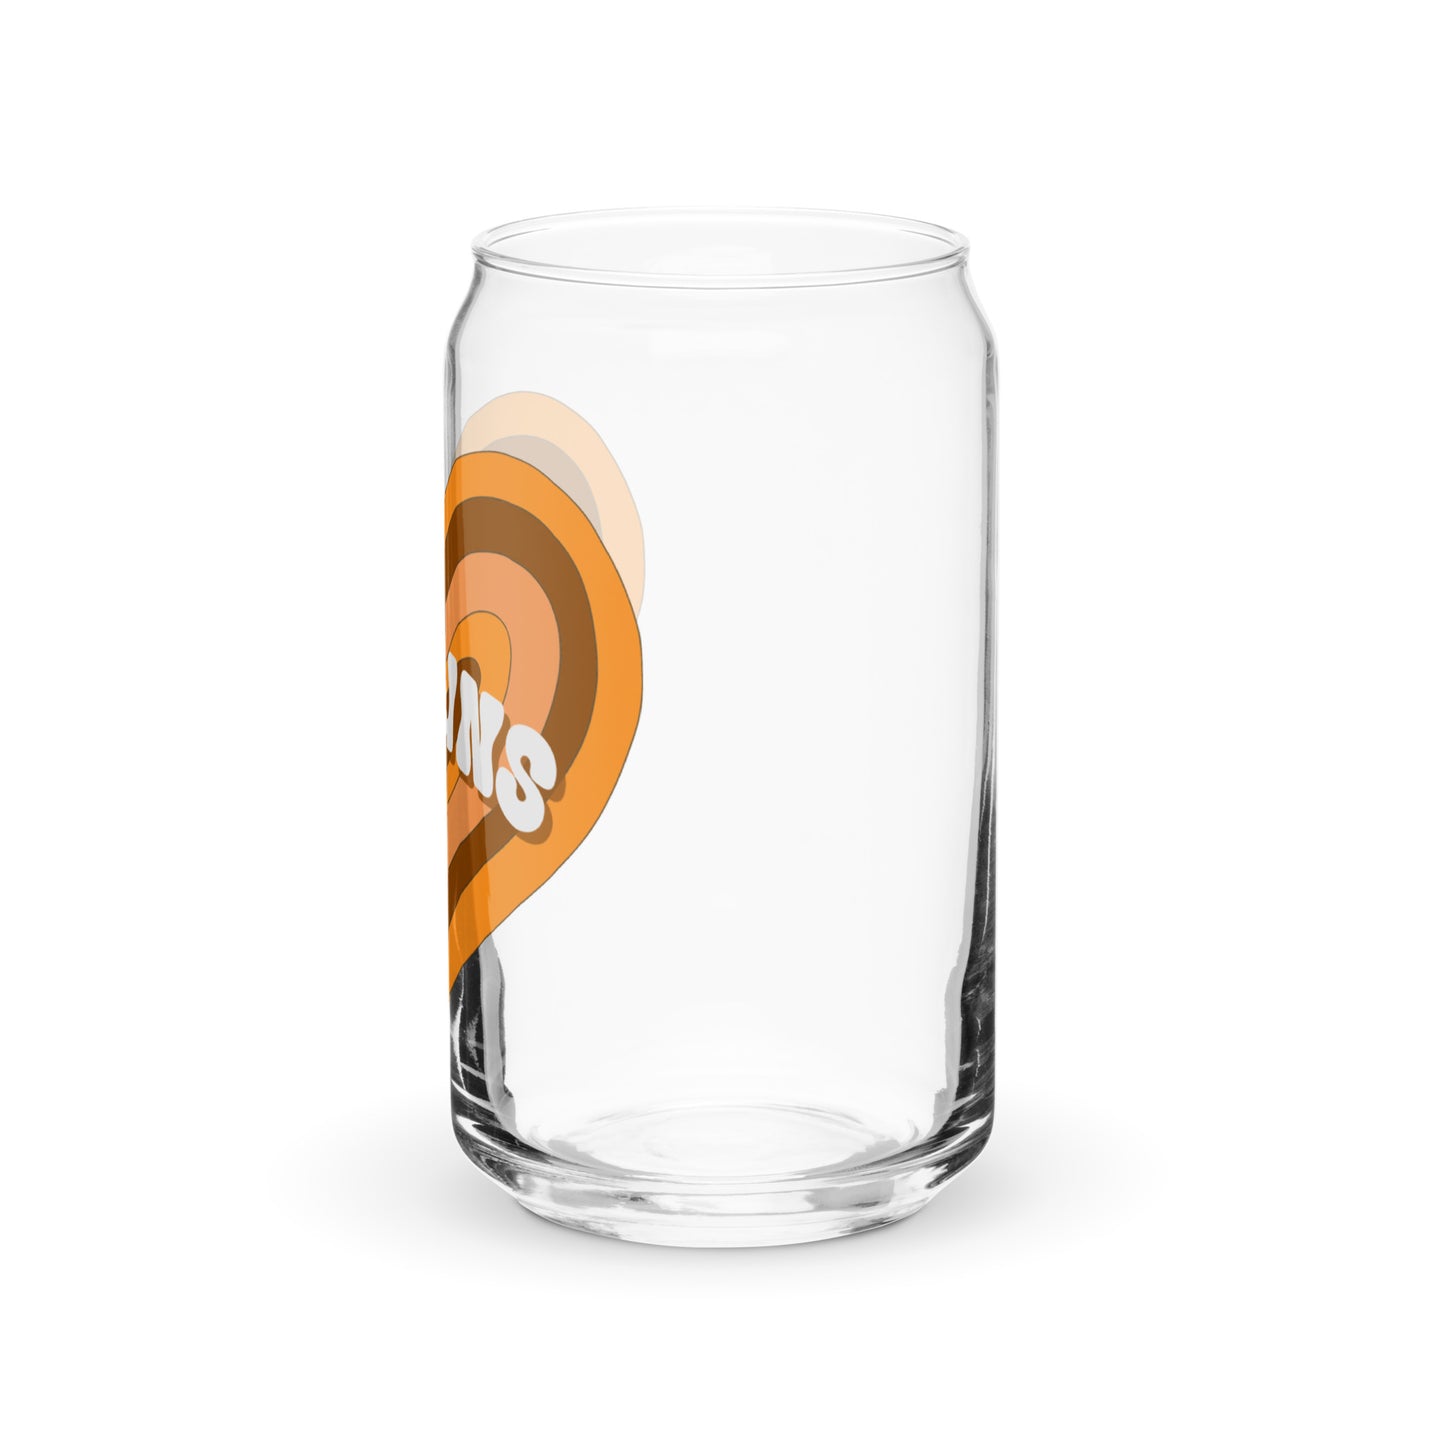 Browns Retro Heart Can-shaped glass